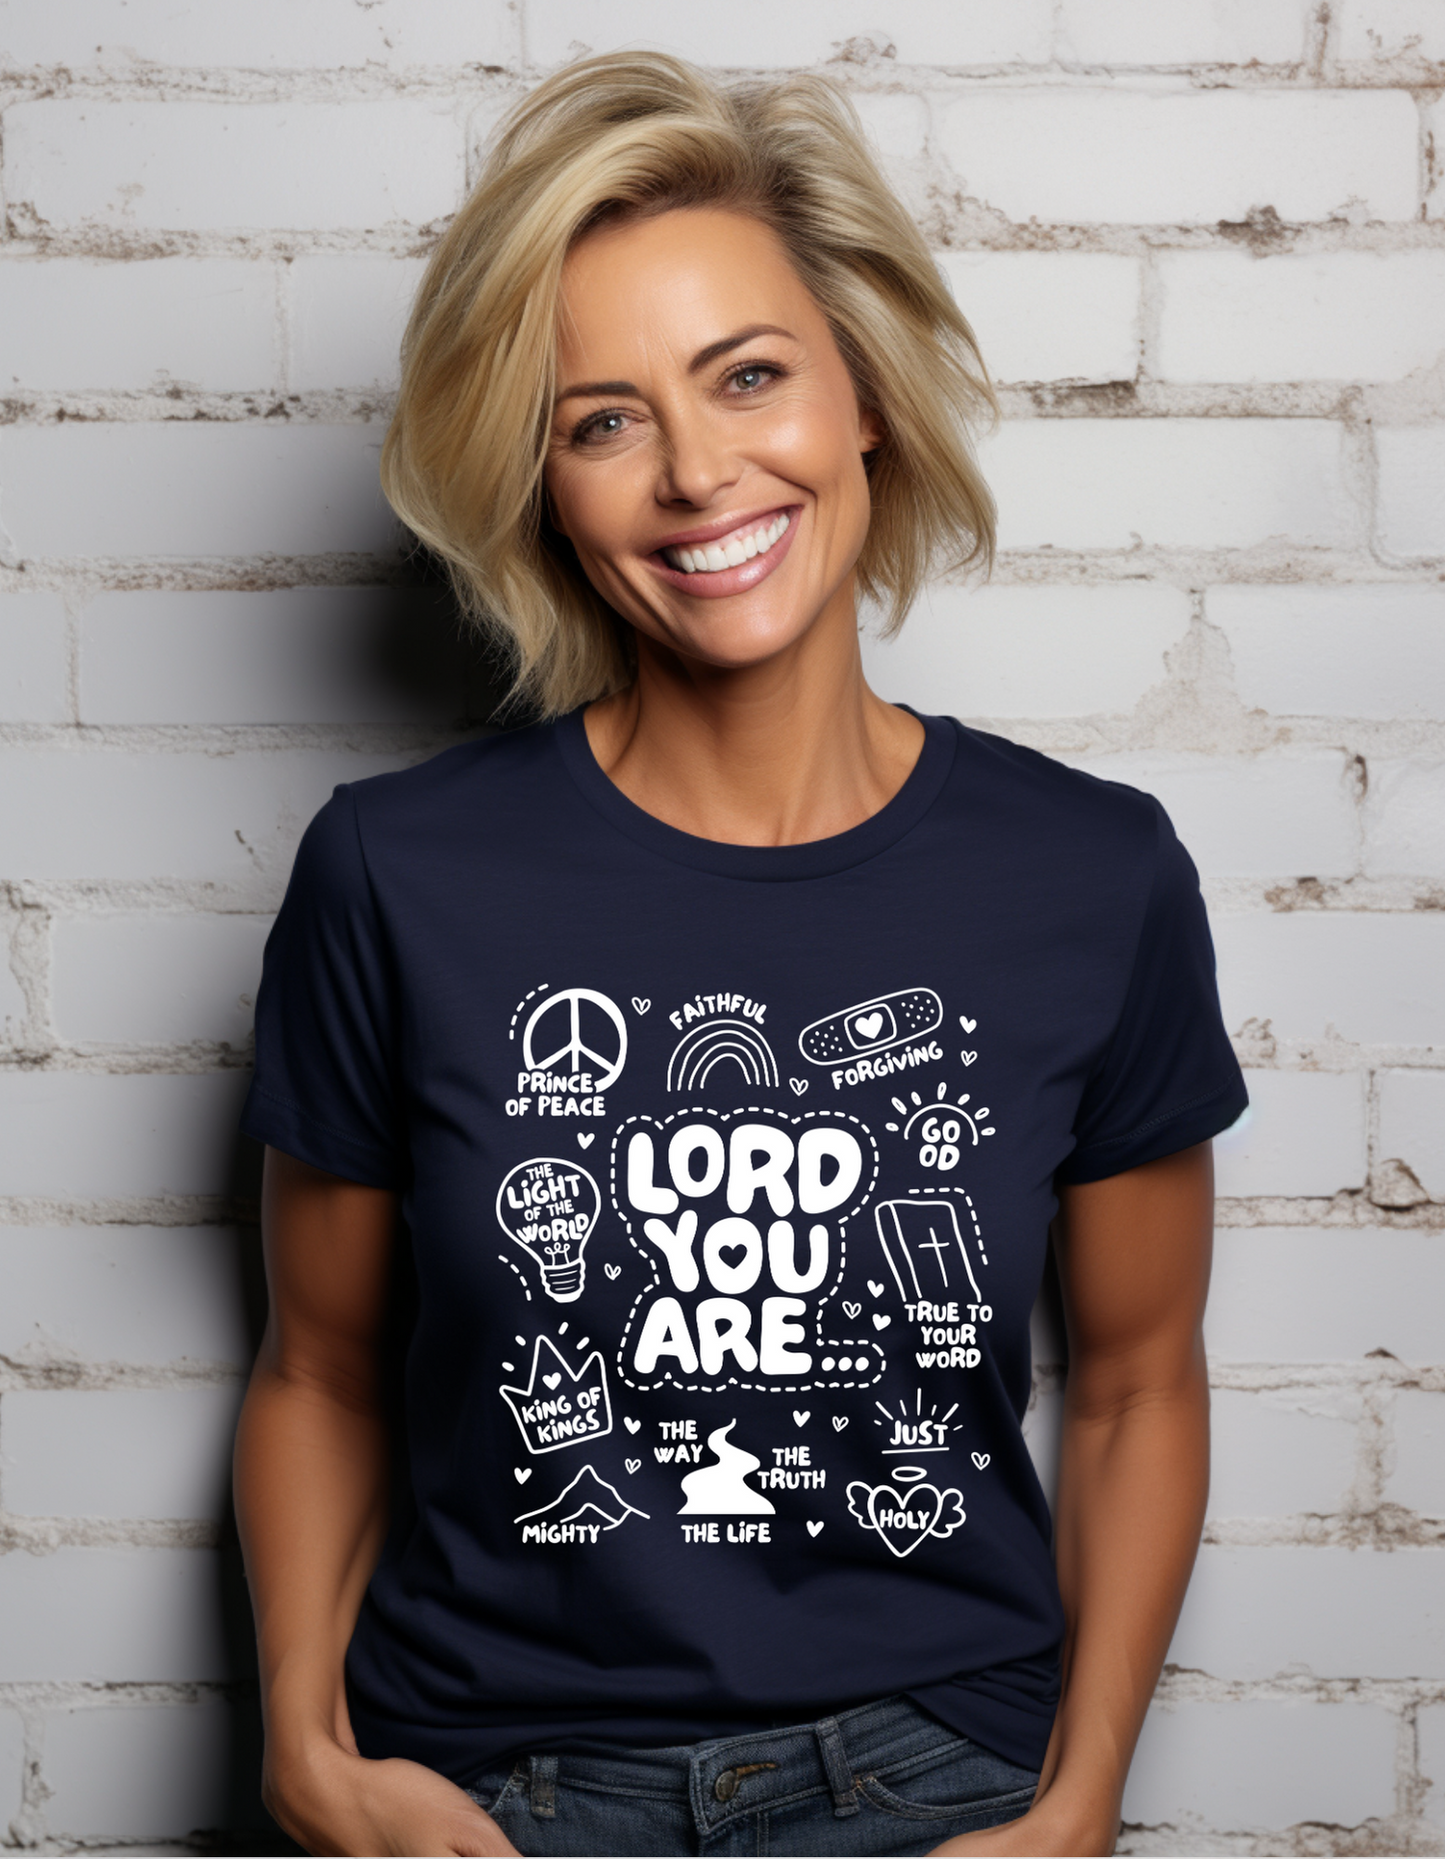 Lord You Are T-shirt